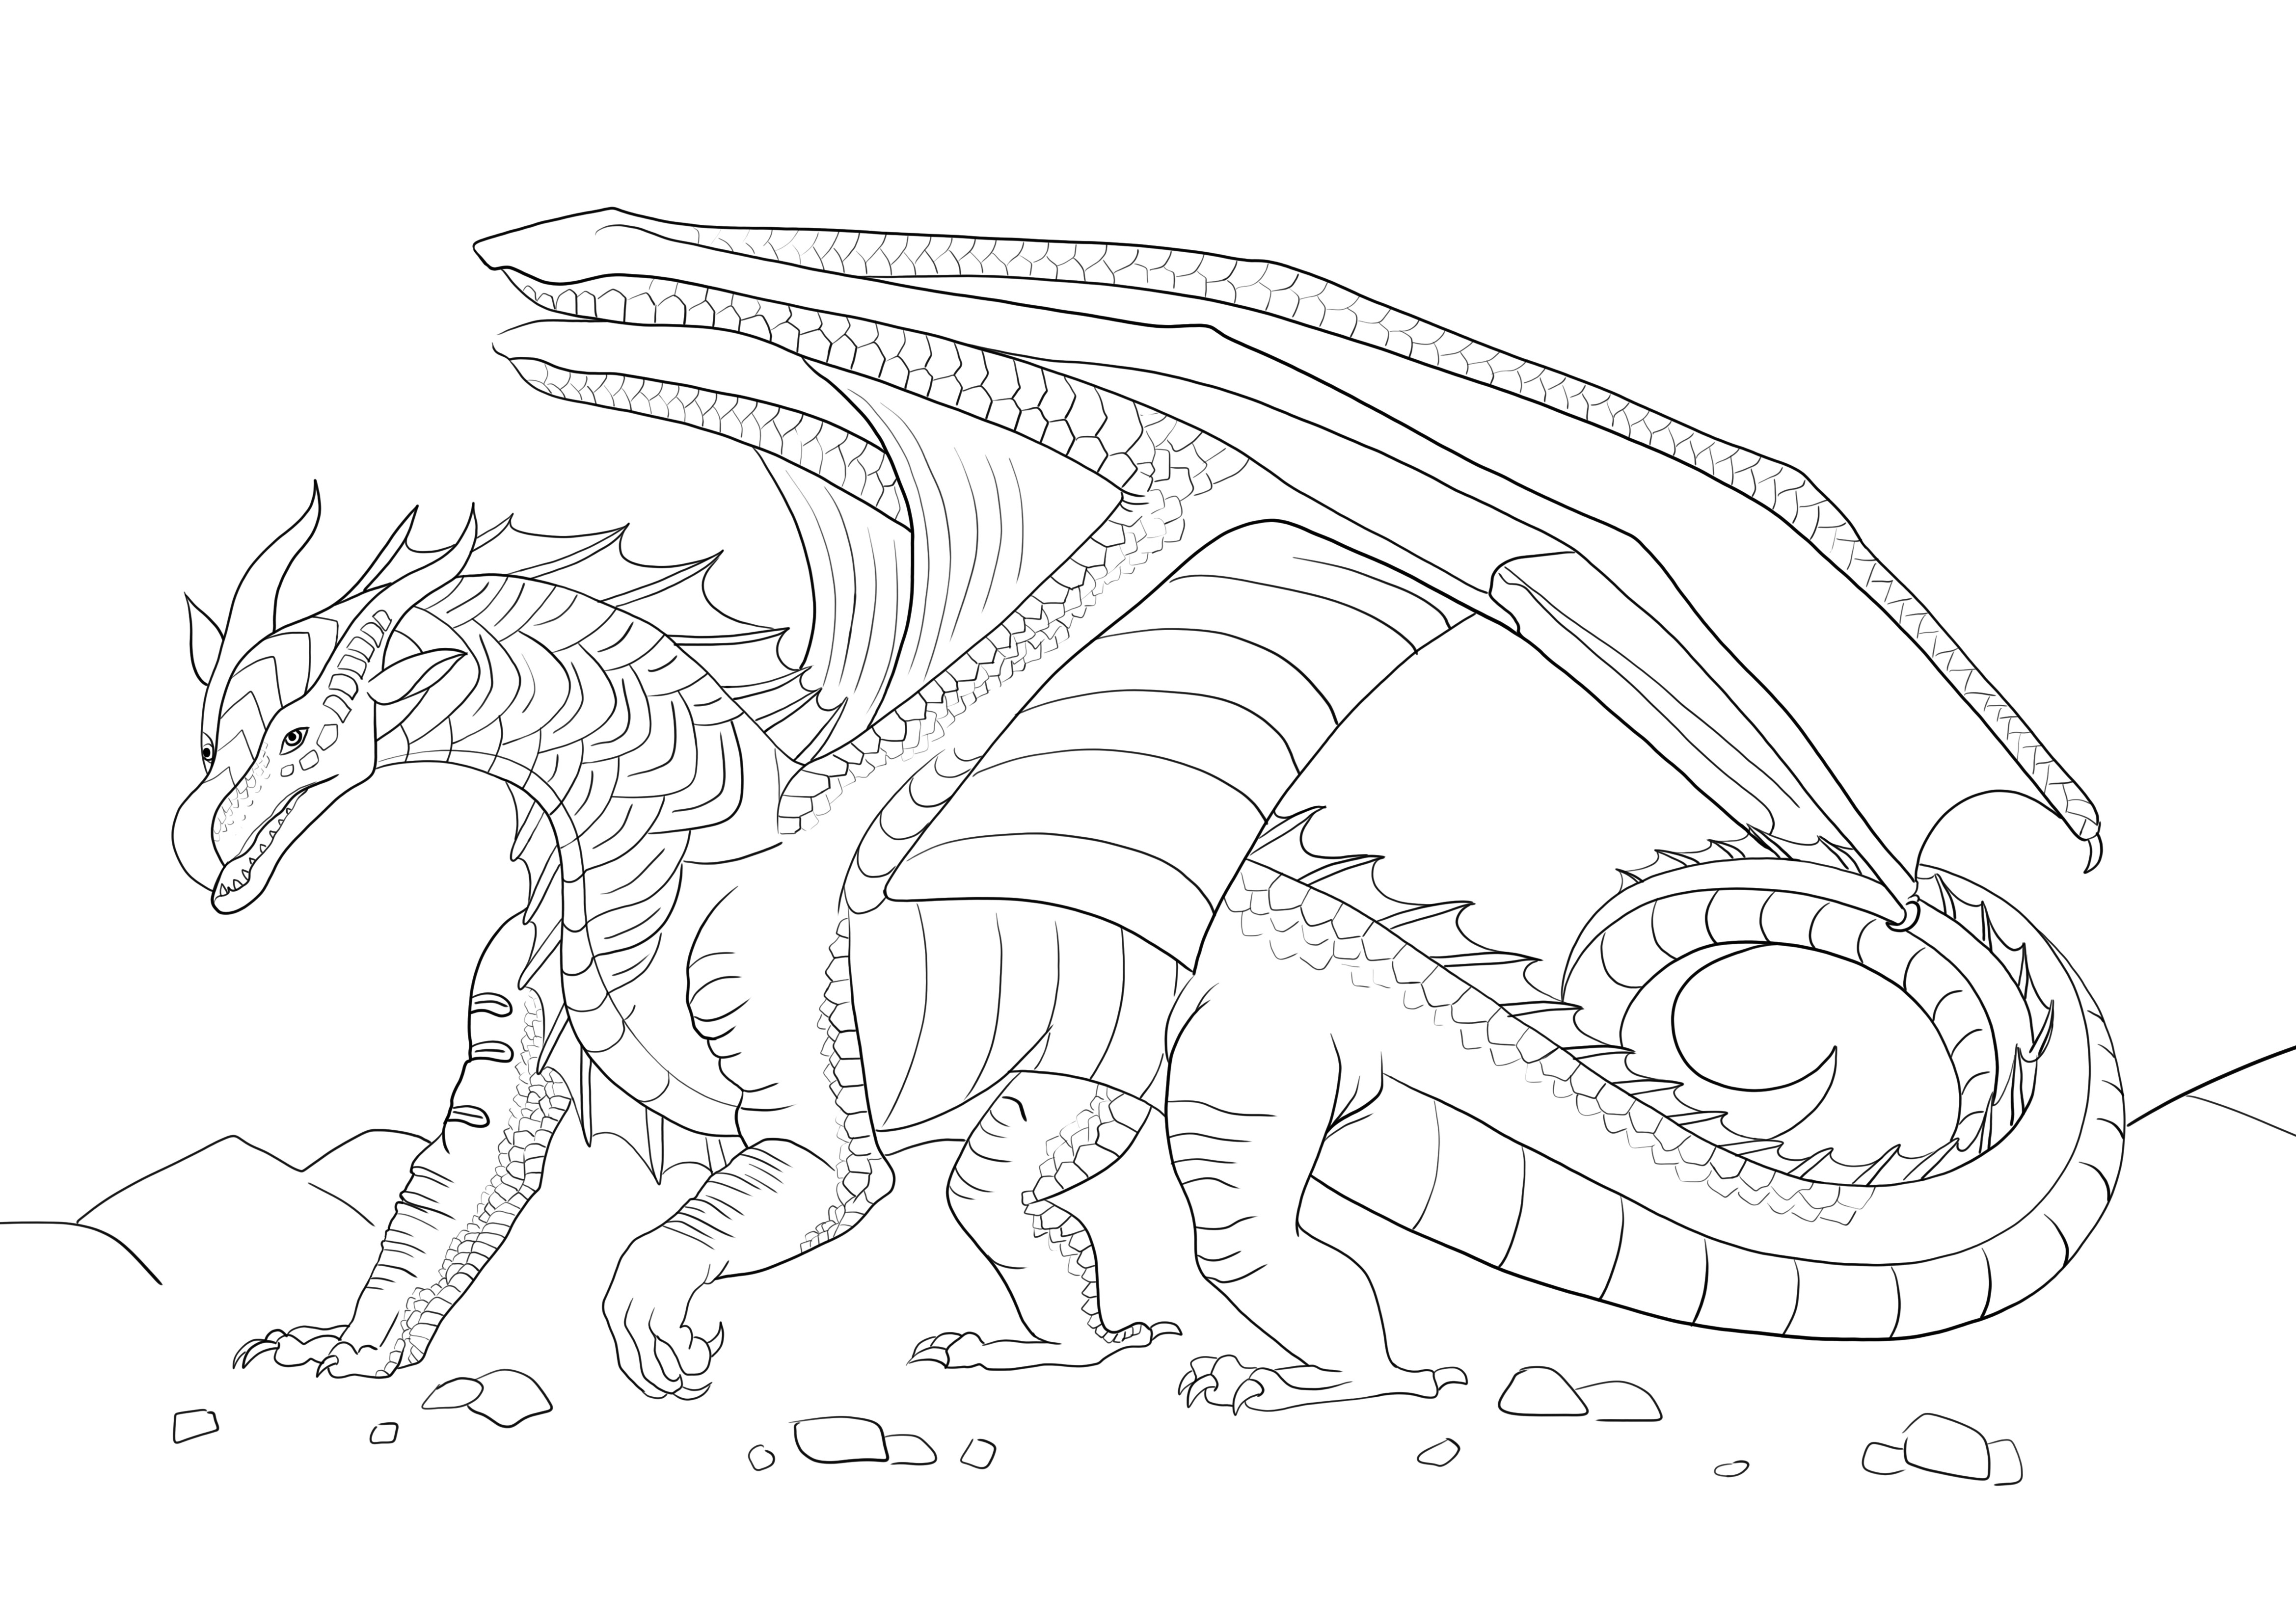 Seawing Dragon from Wings of fire simple to color and free to print image